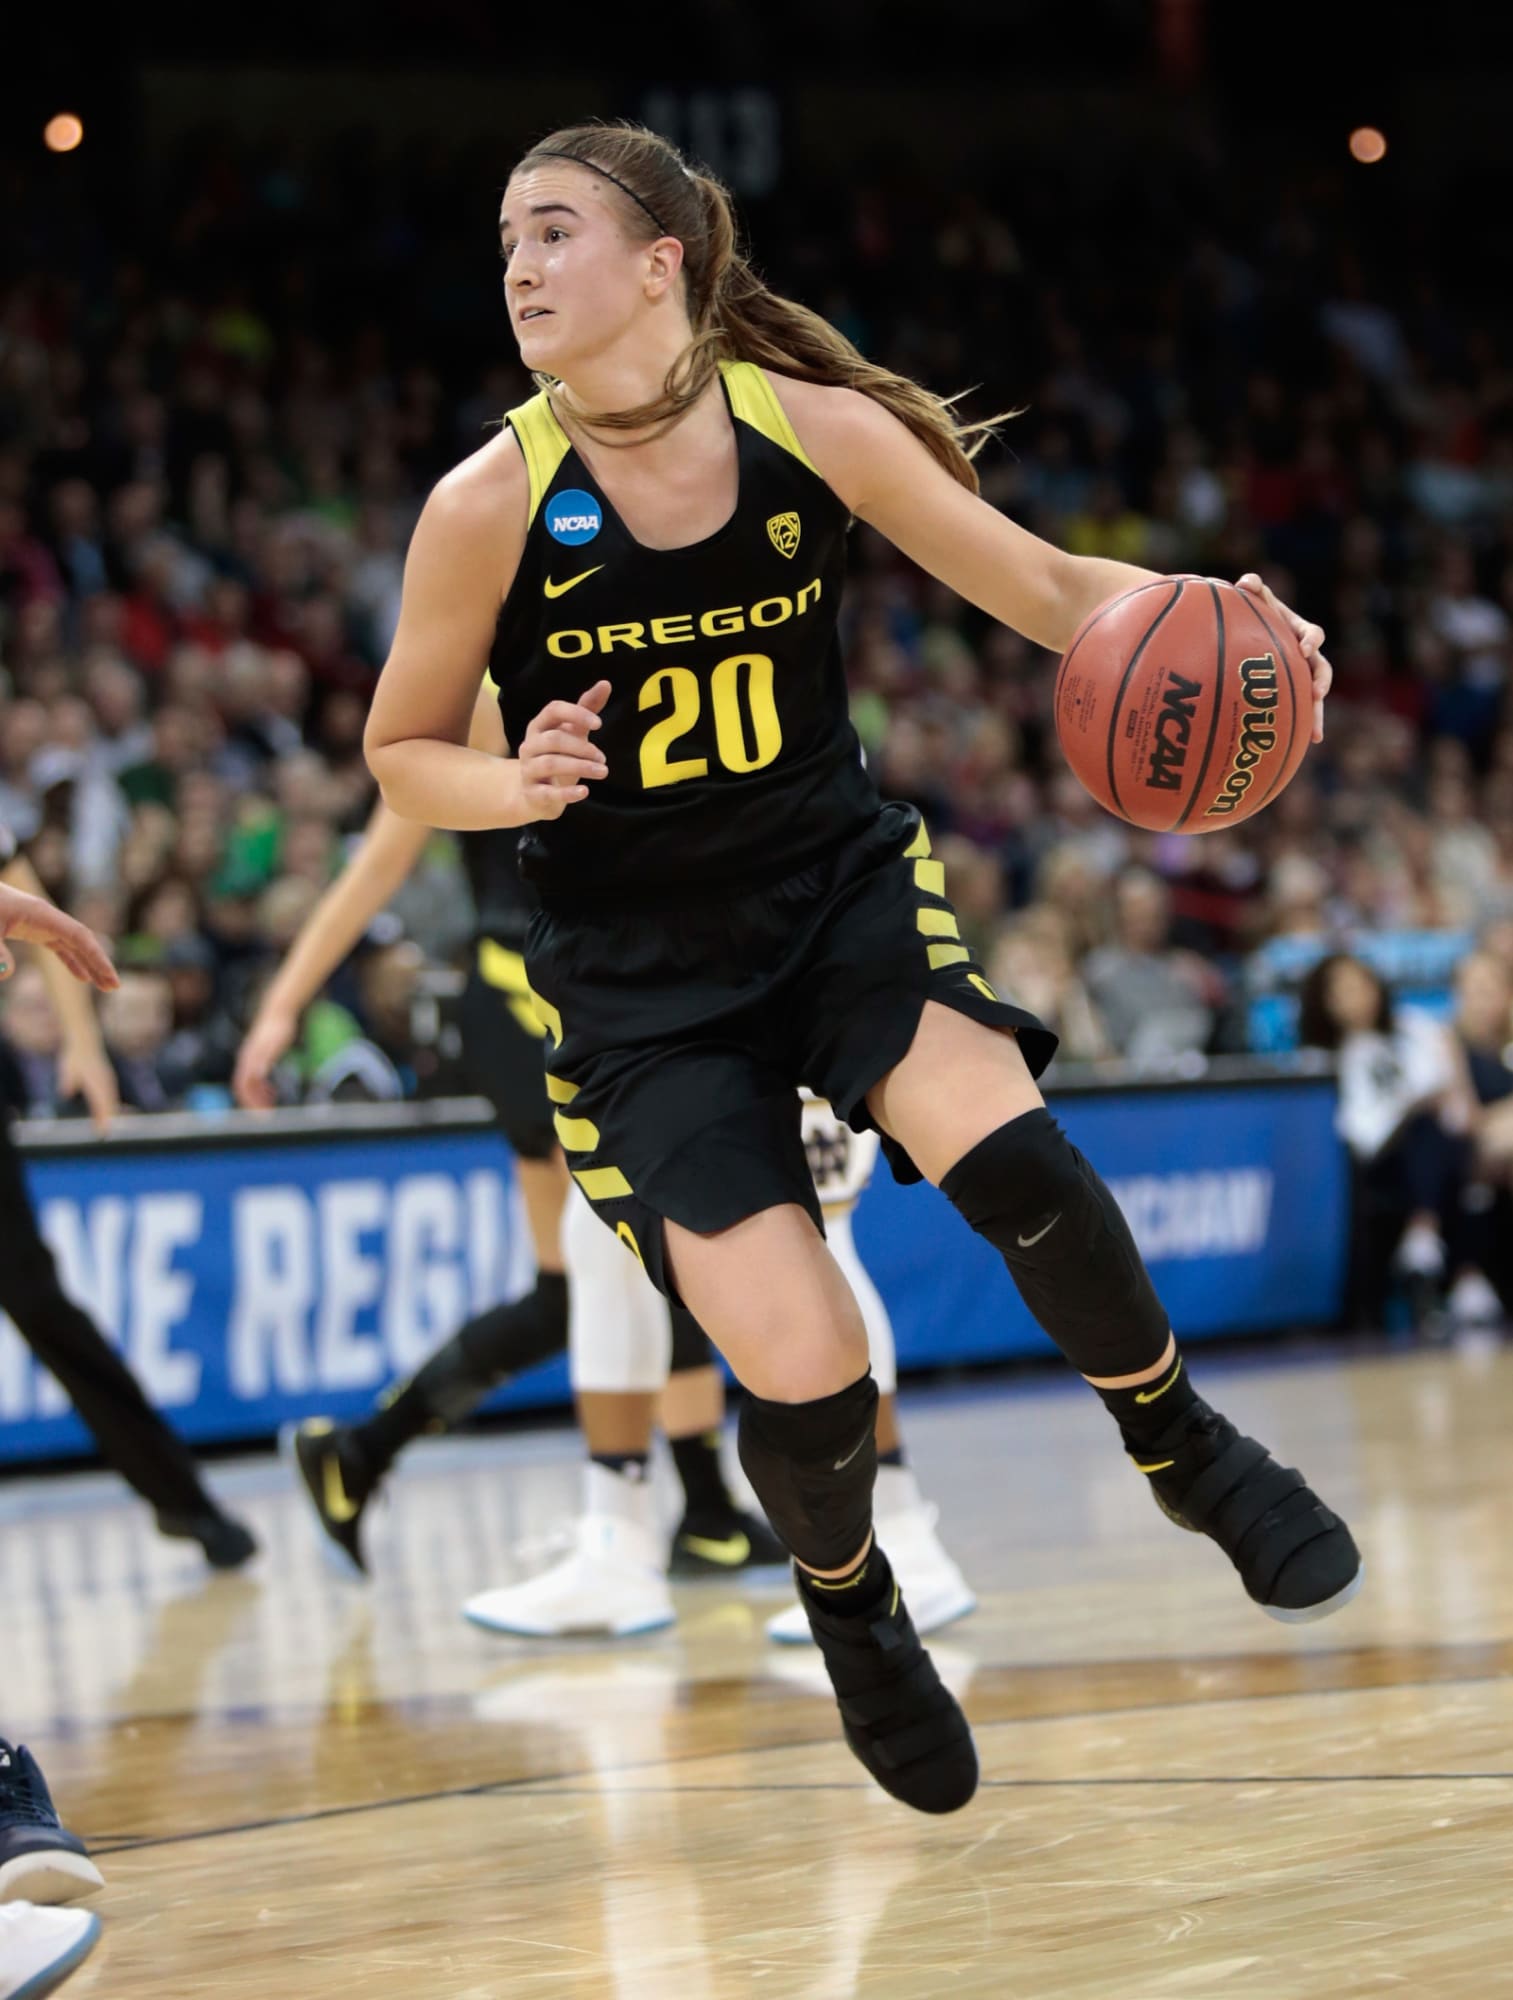 Women #39 s basketball news: Ranking the Pac 12 #39 s top ten players Page 4